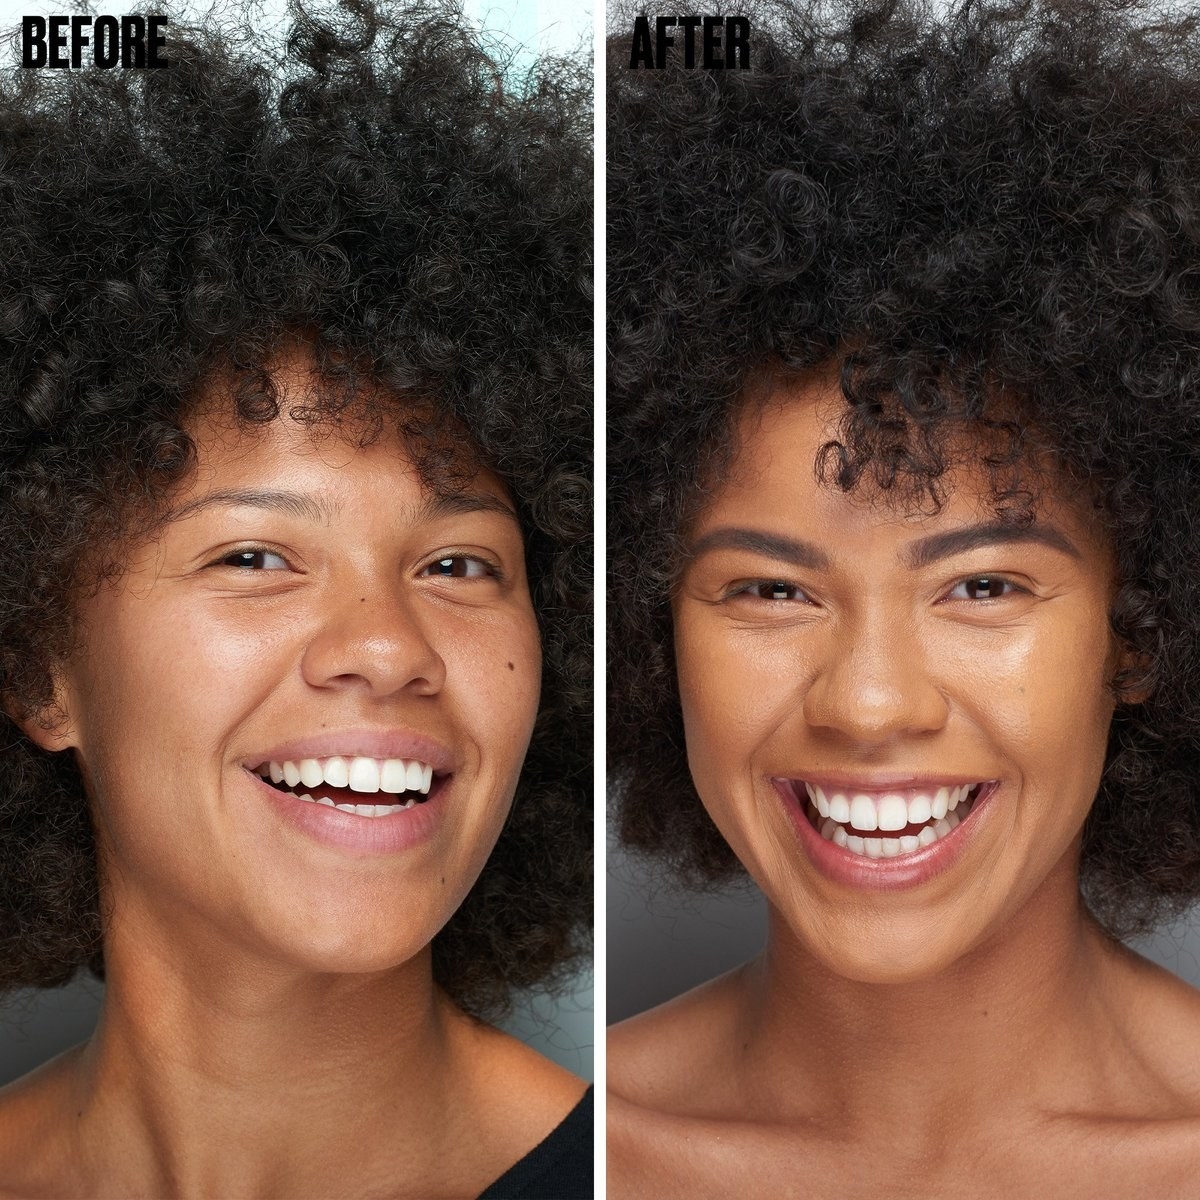 A before/after of a model with sparser eyebrows on the left, and filled-in, darker eyebrows on the right